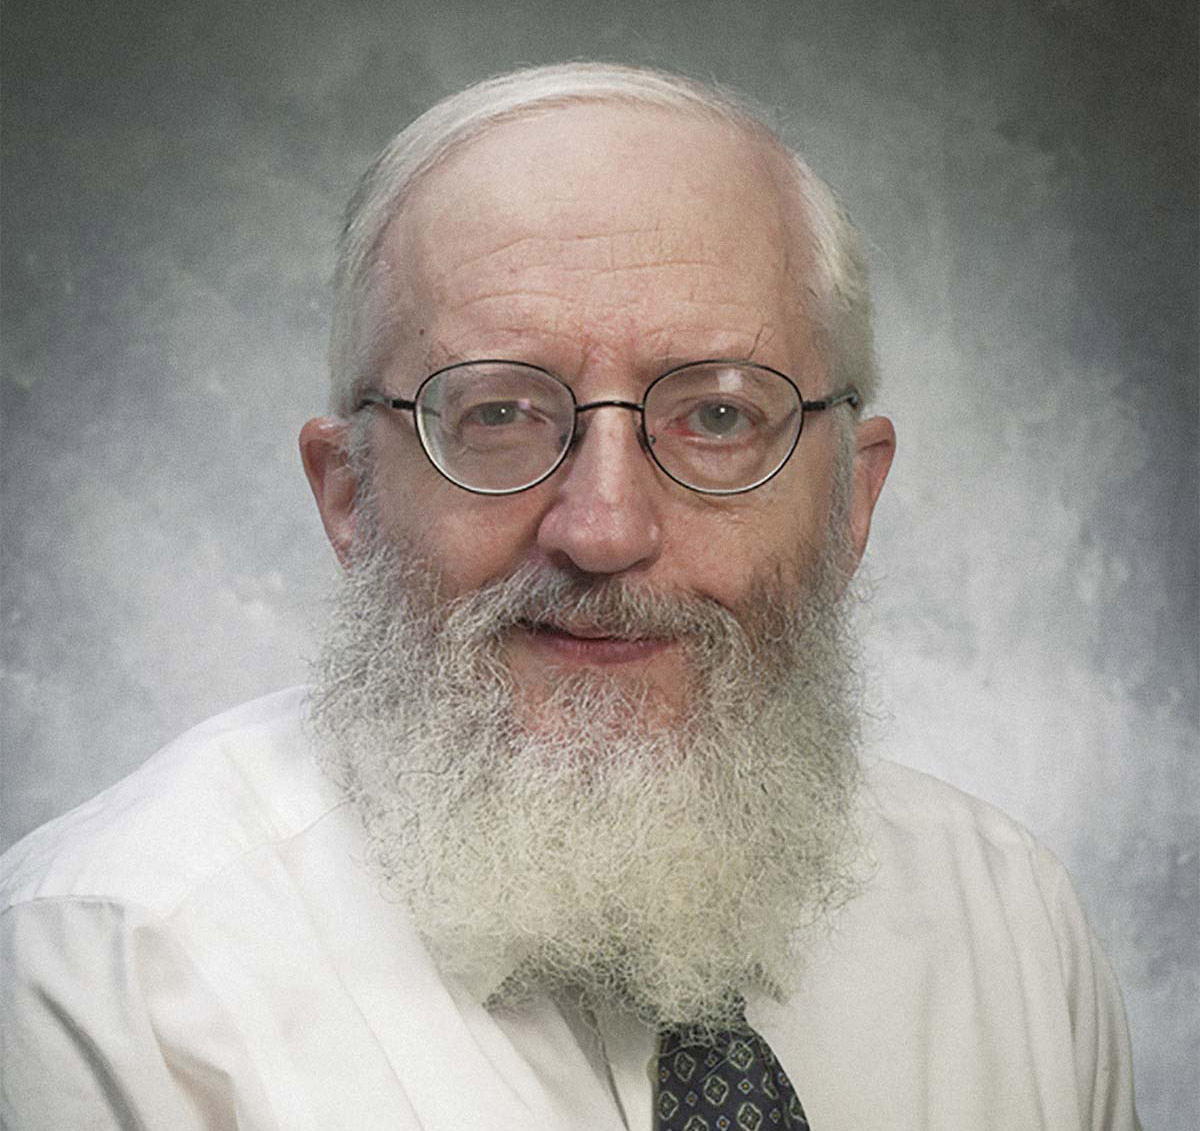 Professor Shakow in a white shirt and tie